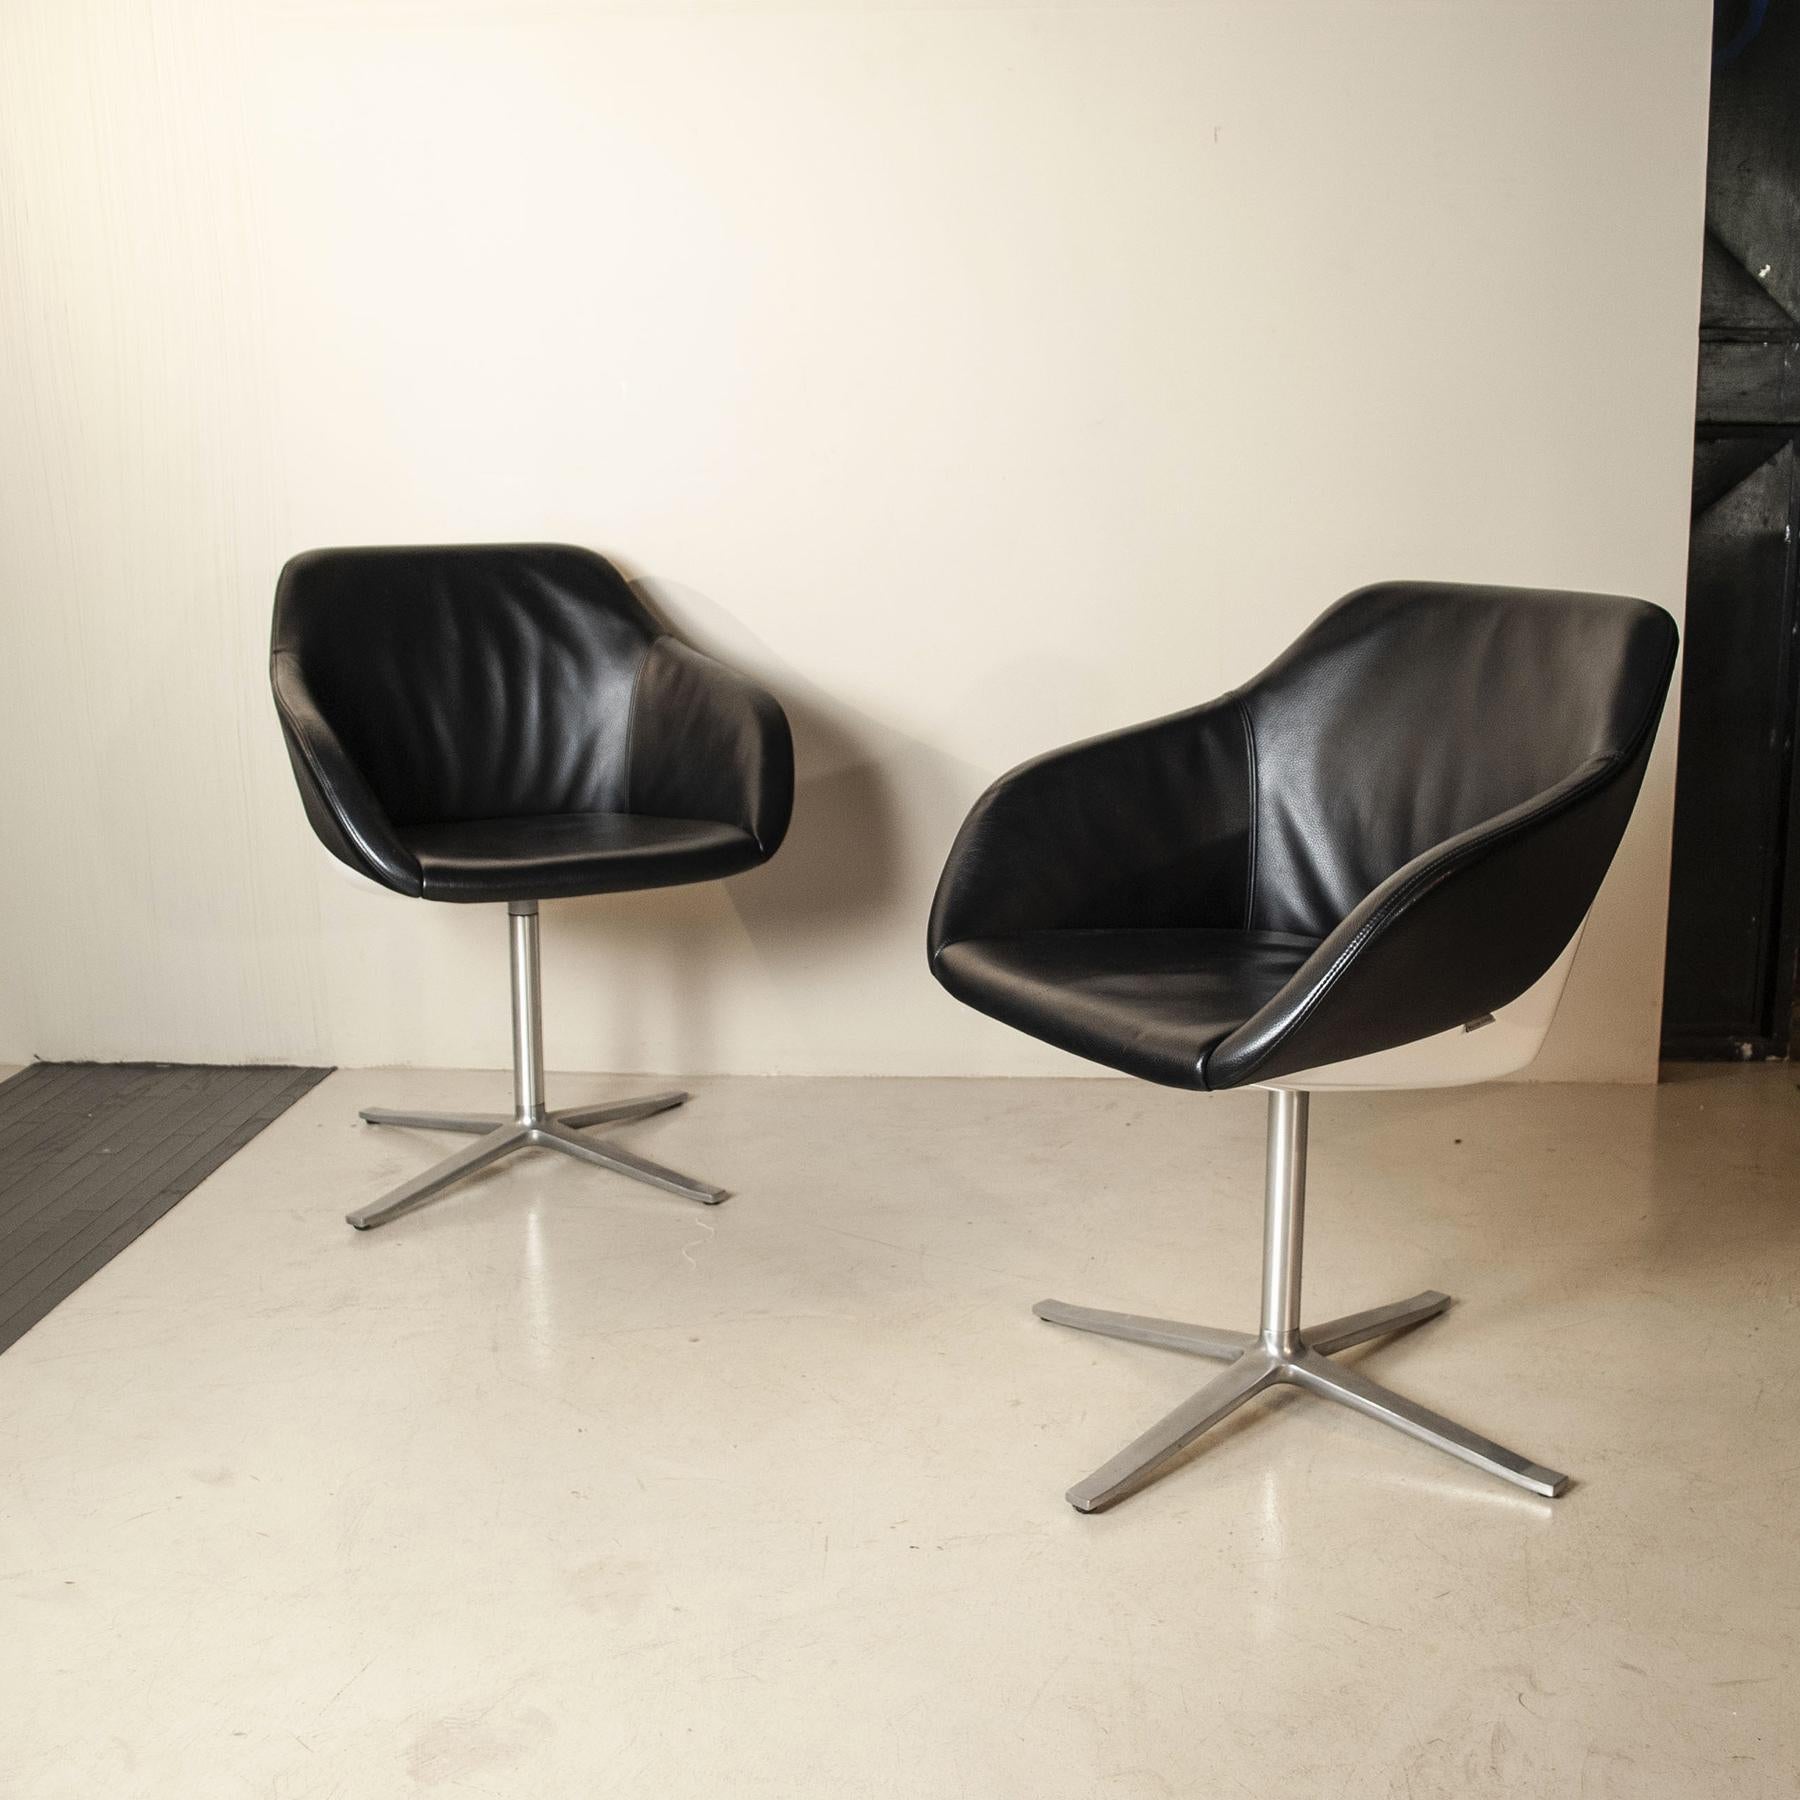 Beautiful shell chairs by the renowned London based design team Pearson Lloyd. The chair has a very stable white plastic shell on the outside, while the inner shell is comfortably upholstered and covered in real leather.

Luke Pearson and Tom